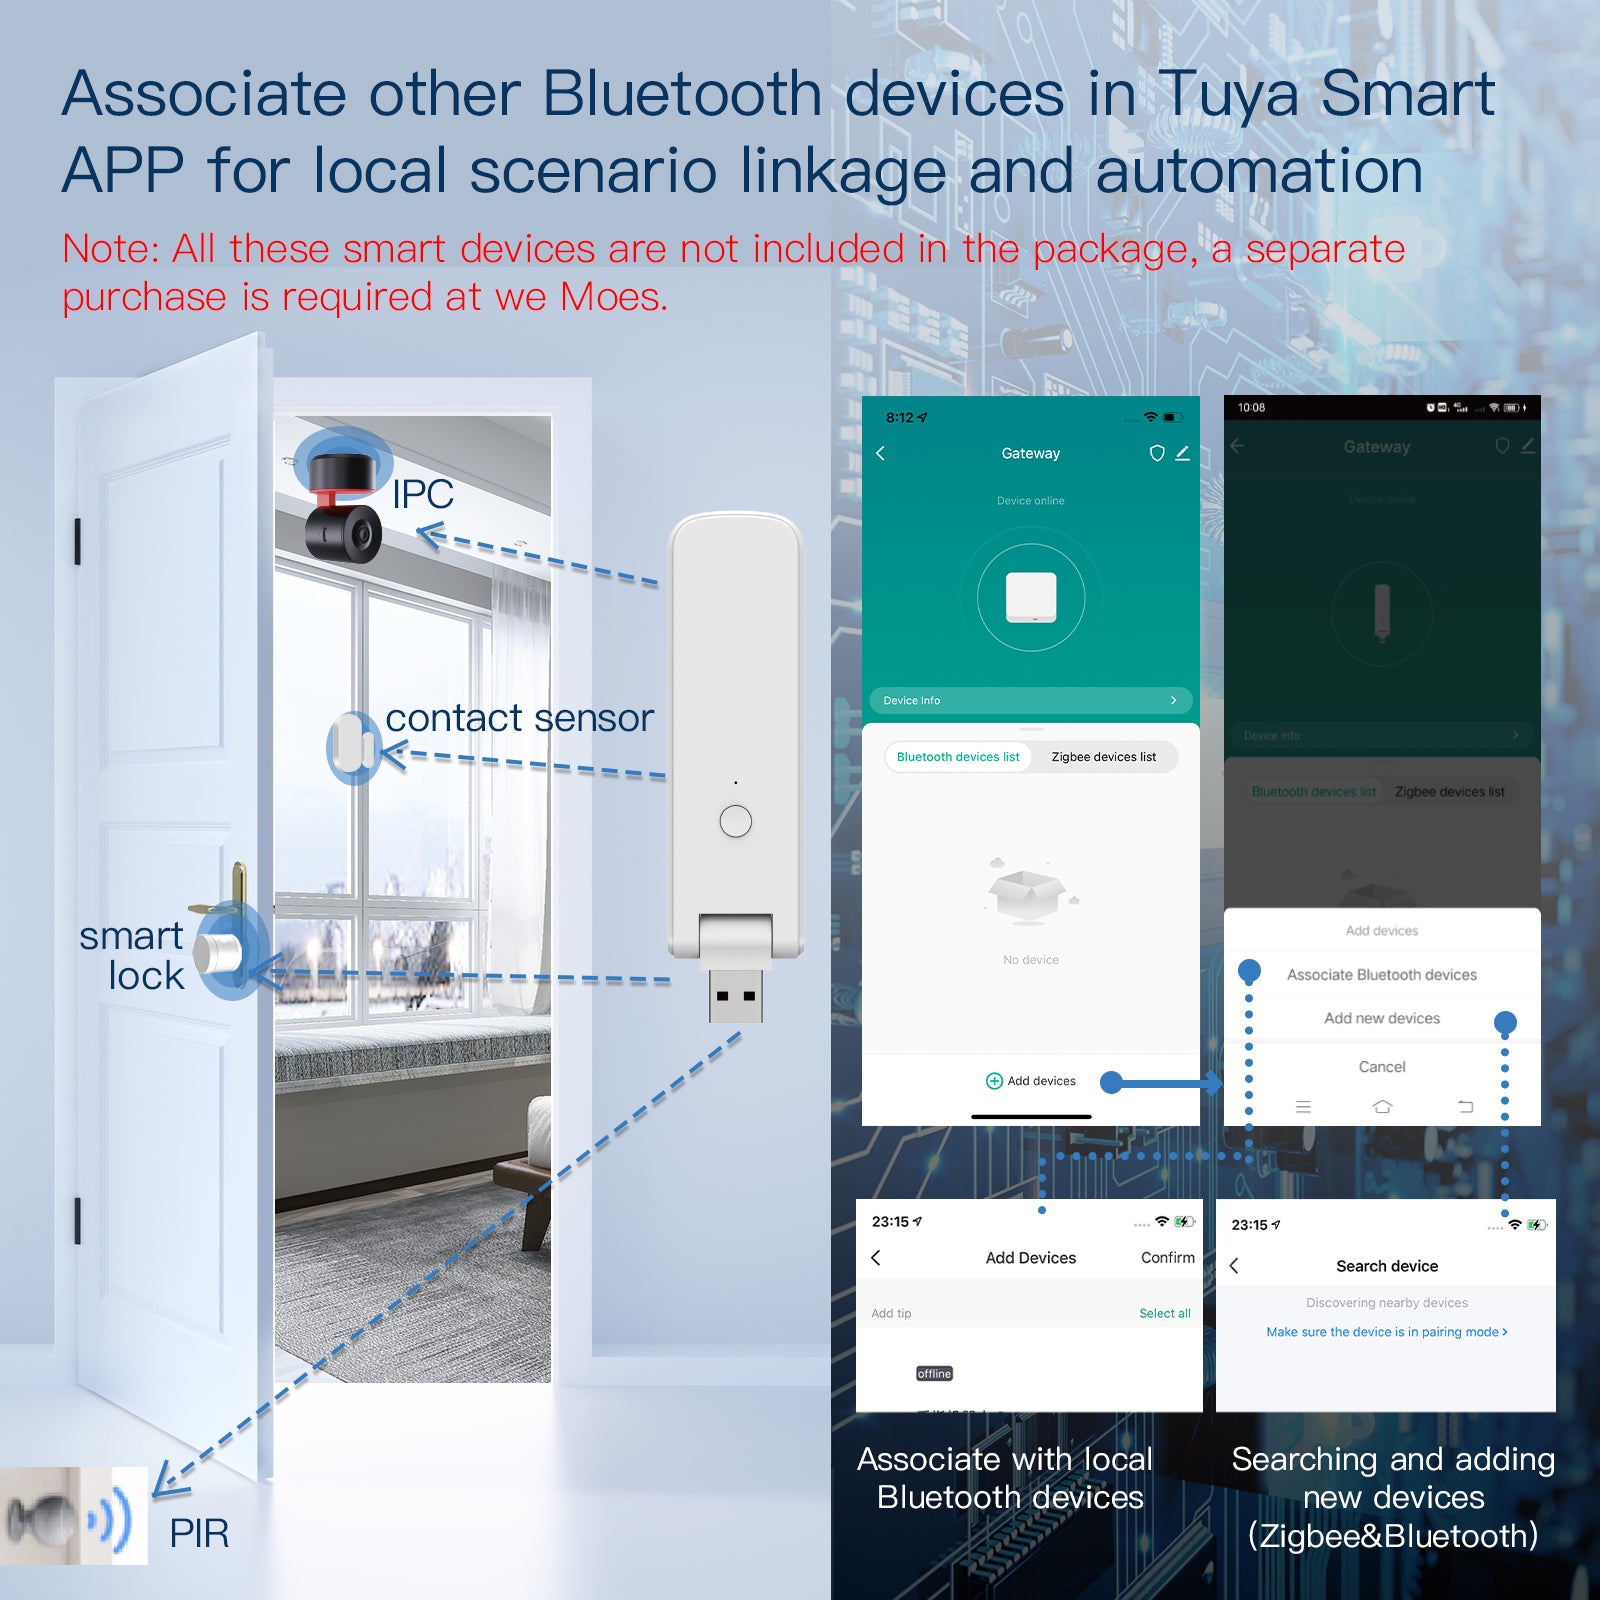 Associate other Bluetooth devices in Tuya Smart APP for local scenario linkage and automation